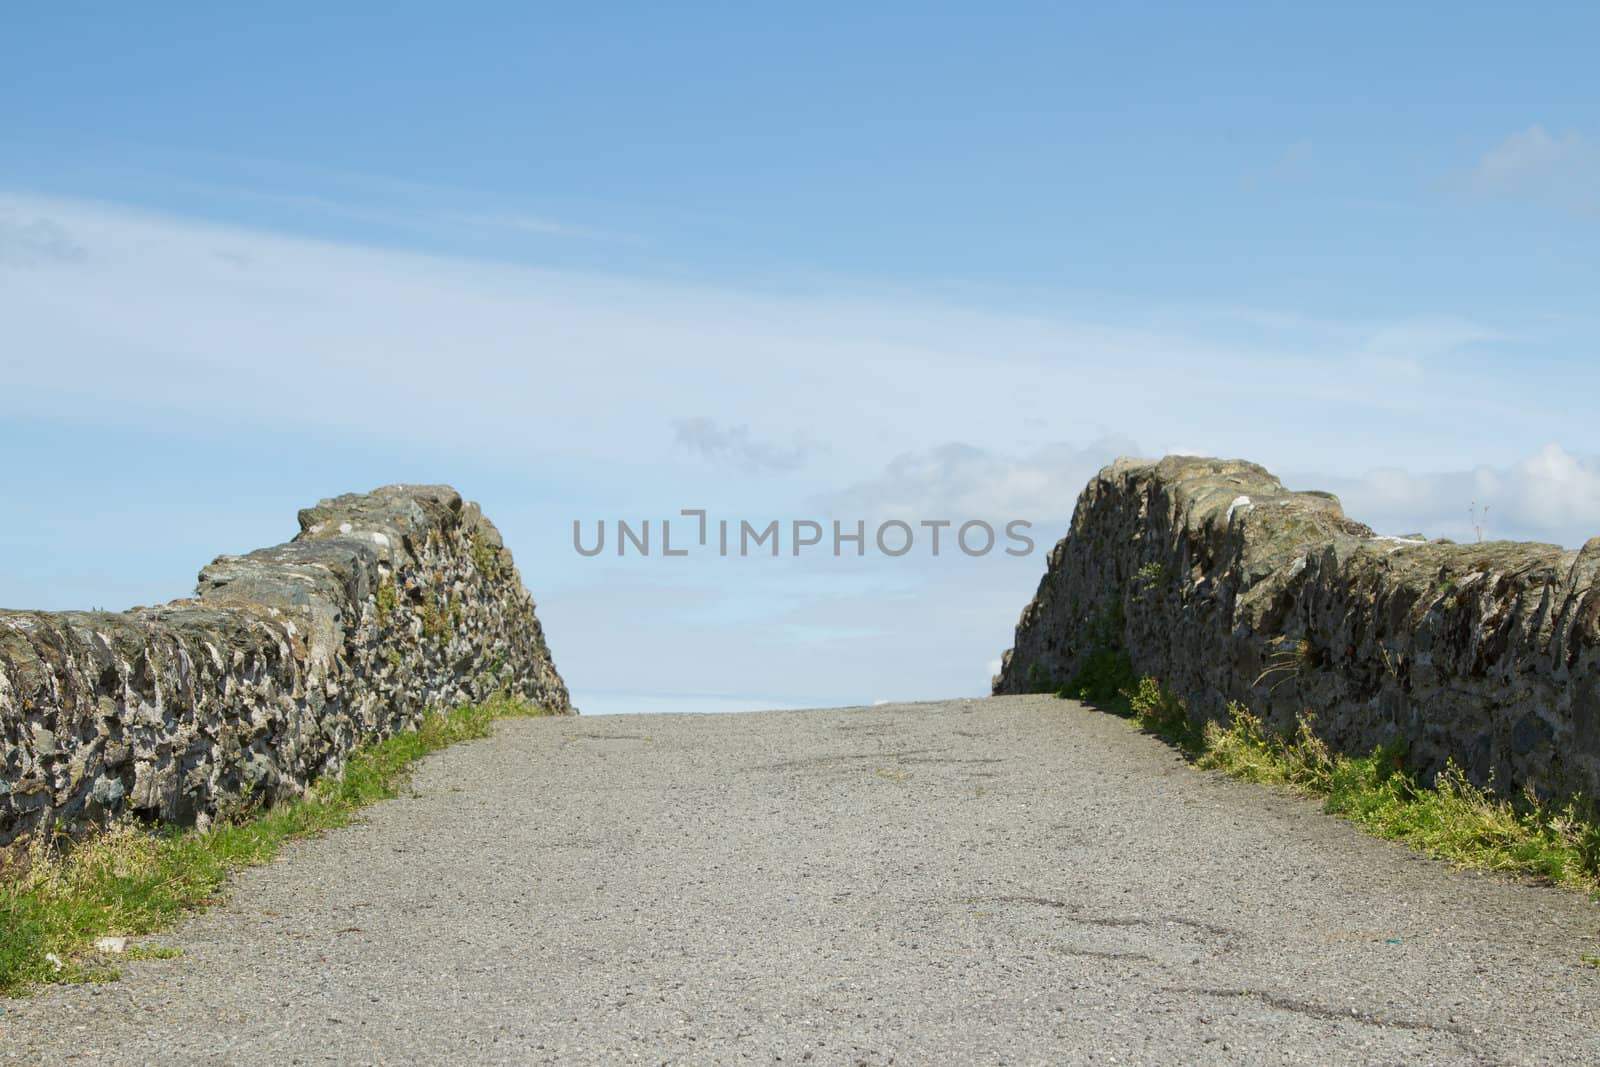 An old bridge rises up with stone walls to the horizon beyond with a blue cloudy sky.